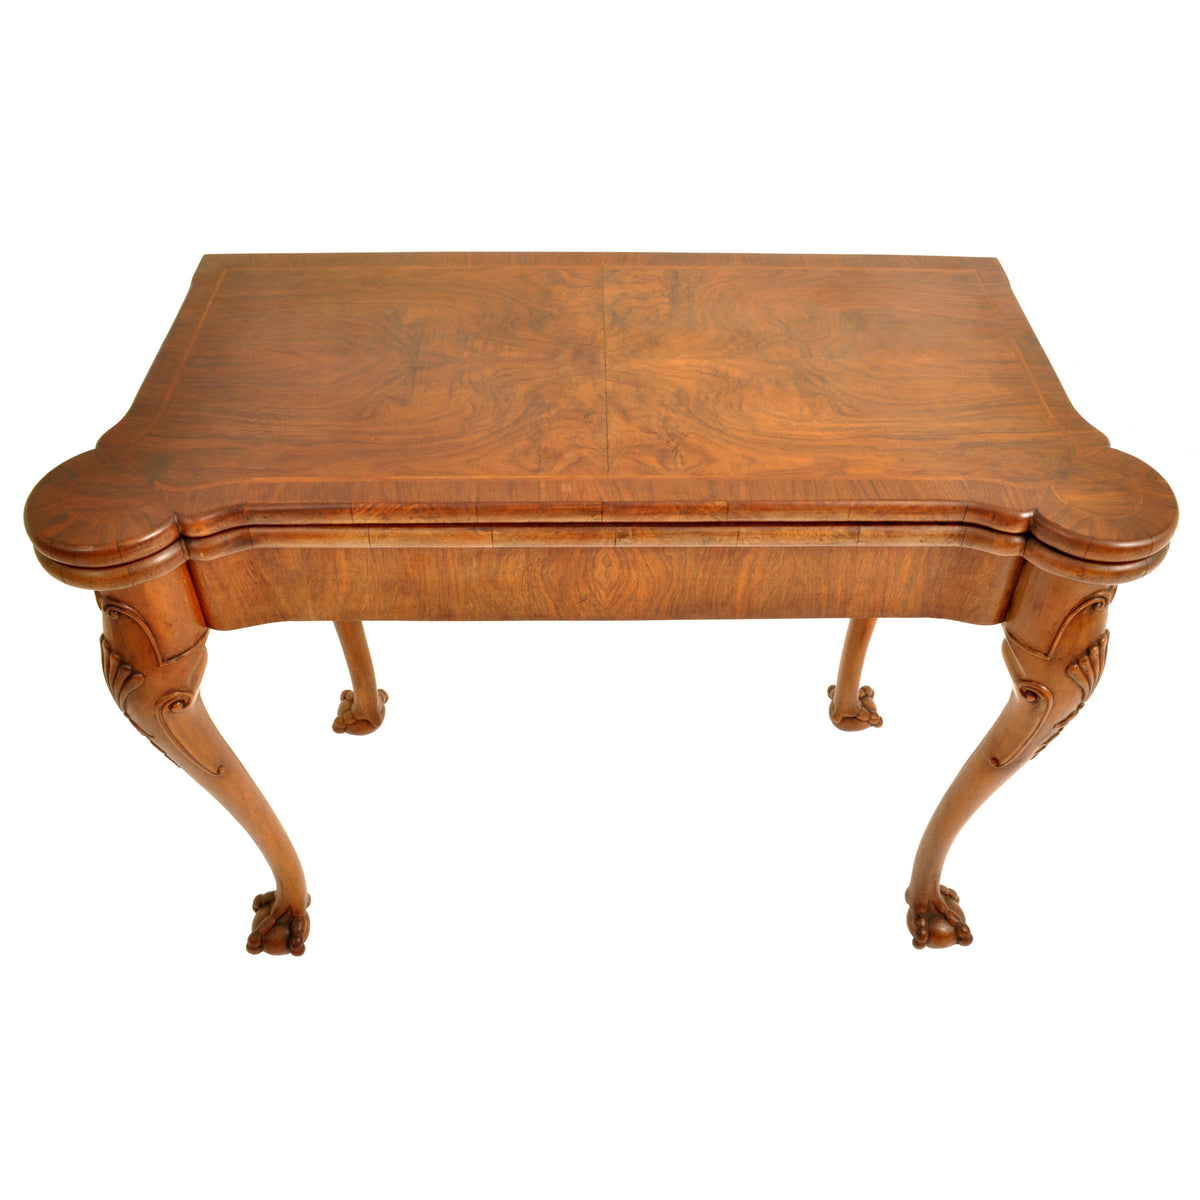 Antique 19th Century Georgian Chippendale Carved Walnut Card / Games Table, circa 1890